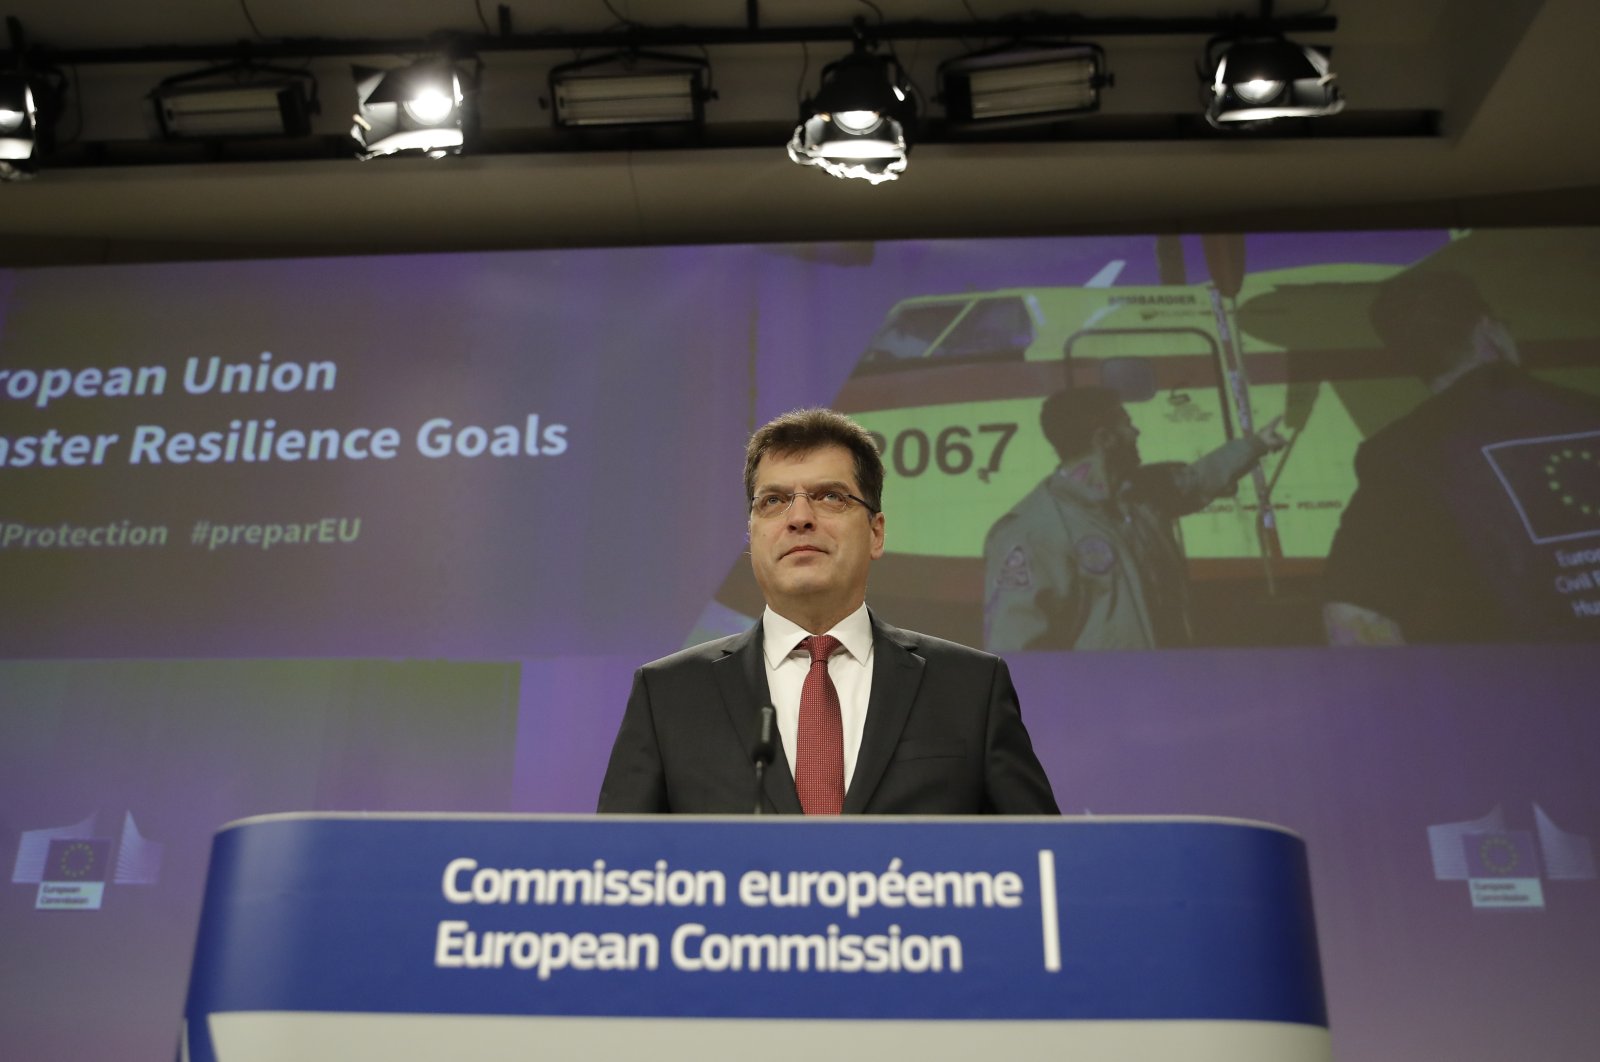 European Commissioner for Crisis Management, in charge of European Civil Protection and Humanitarian Aid, Janez Lenarcic holds a news conference on EU Disaster Resilience Goals following the earthquake in Türkiye and Syria, in Brussels, Belgium, Feb. 8, 2023. (EPA File Photo)